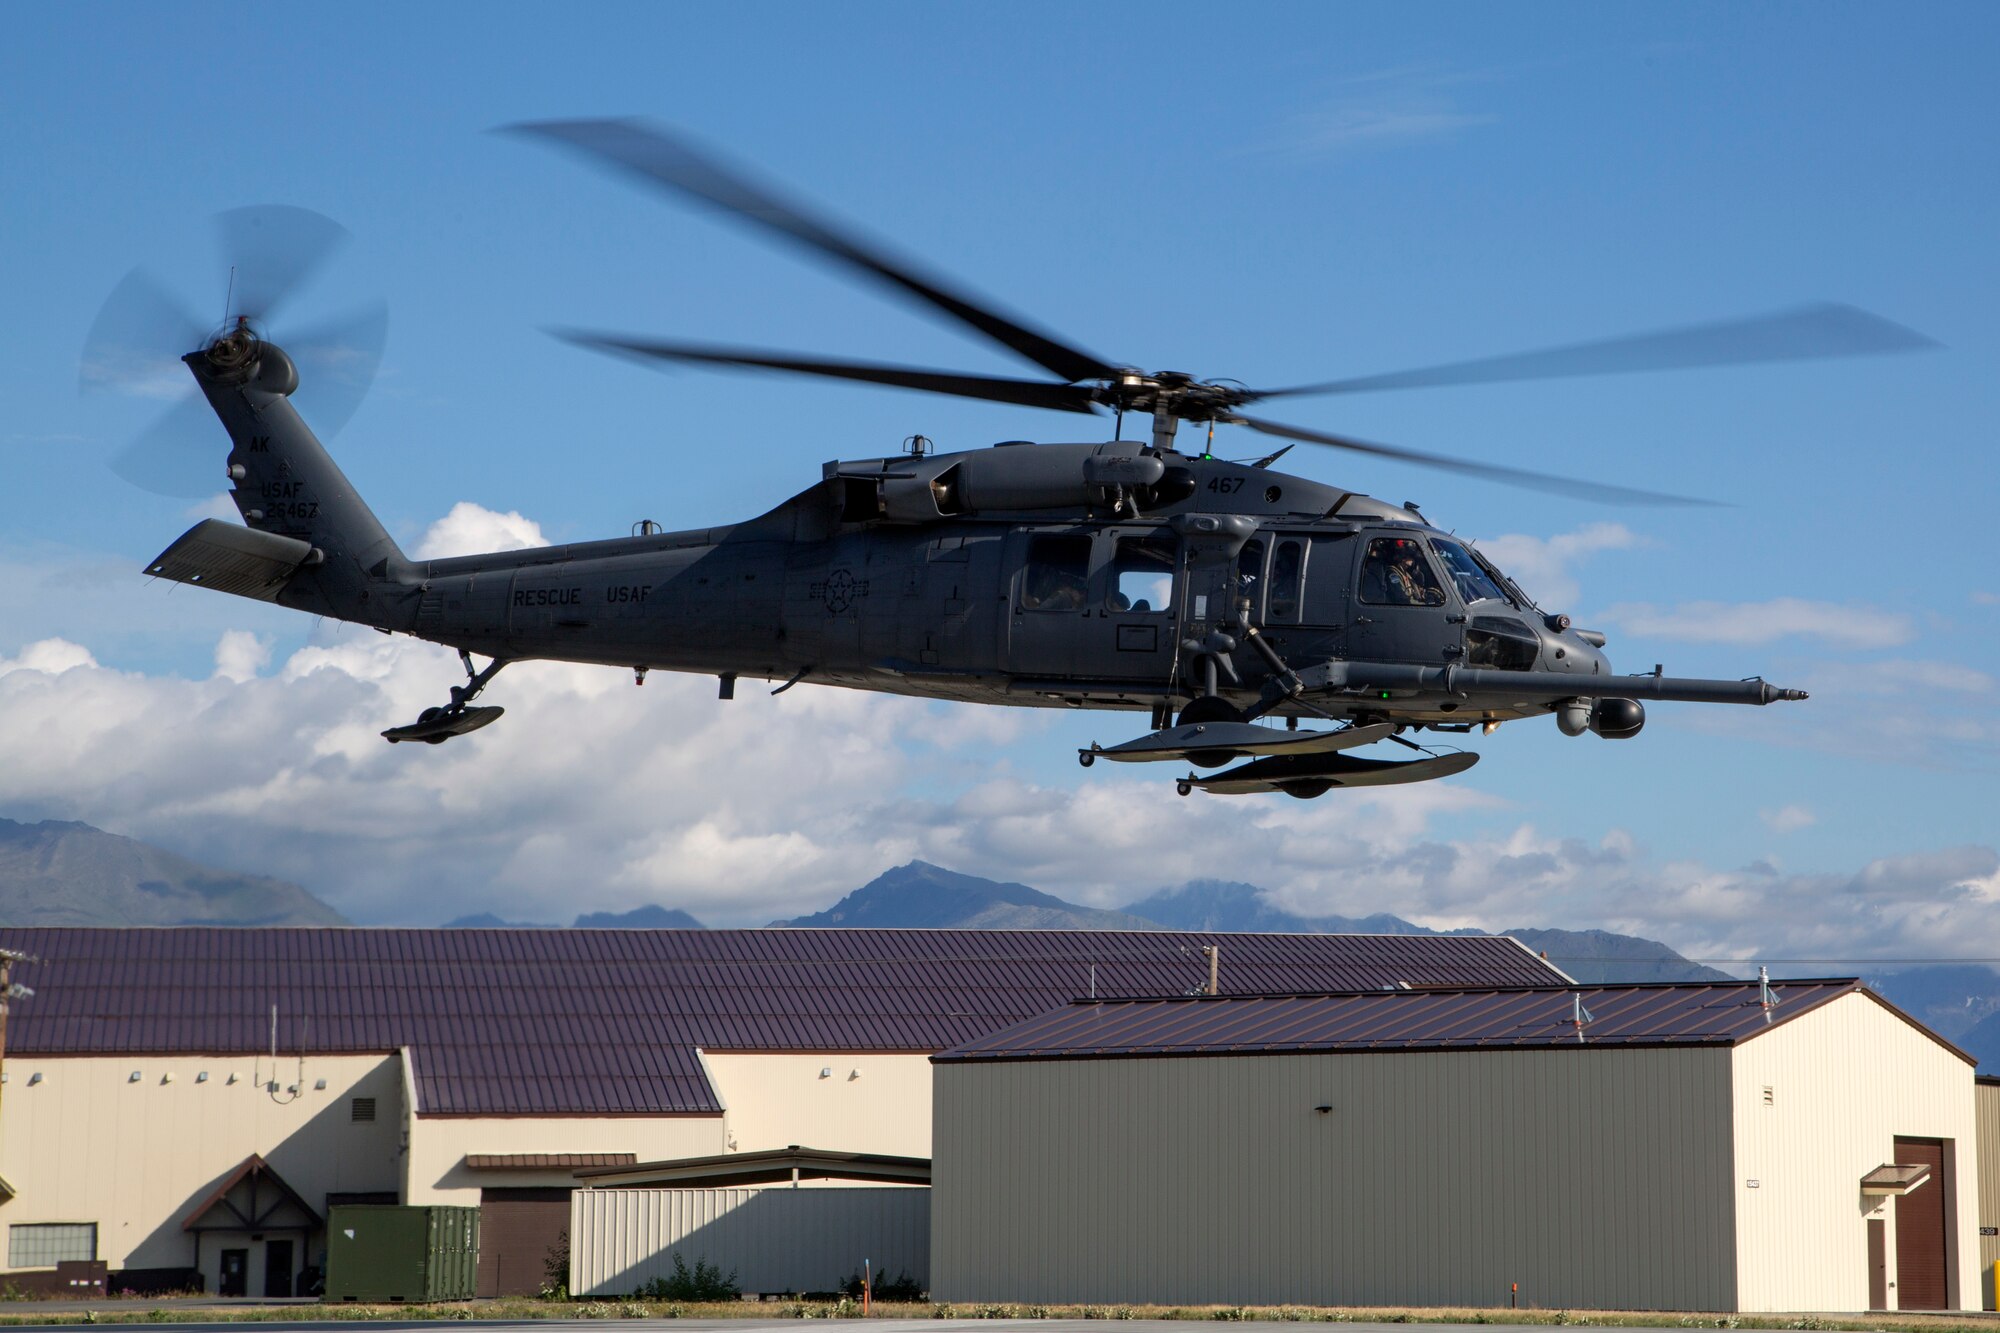 An Alaska Air National Guard HH-60G Pave Hawk helicopter, assigned to the 210th Rescue Squadron, takes off from Joint Base Elmendorf-Richardson, Alaska, July 23, 2015. The 210th Rescue Squadron provides emergency rescue services in addition to training for wartime combat search-and-rescue missions.